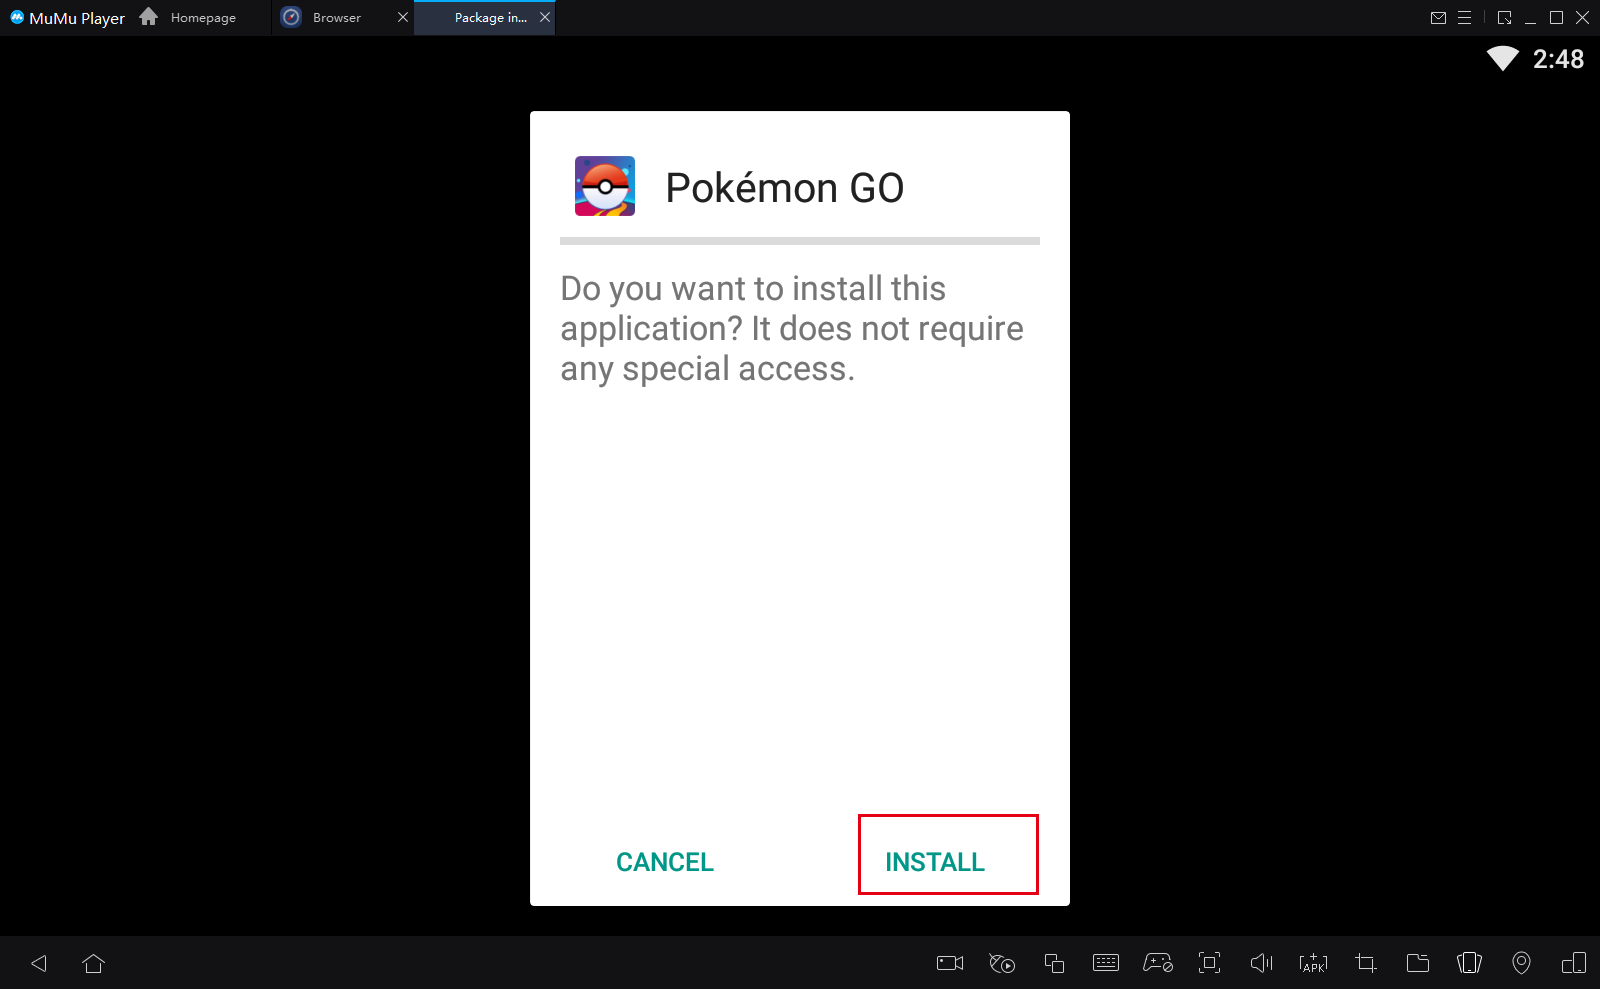 Download and play Pokémon GO on PC with MuMu Player